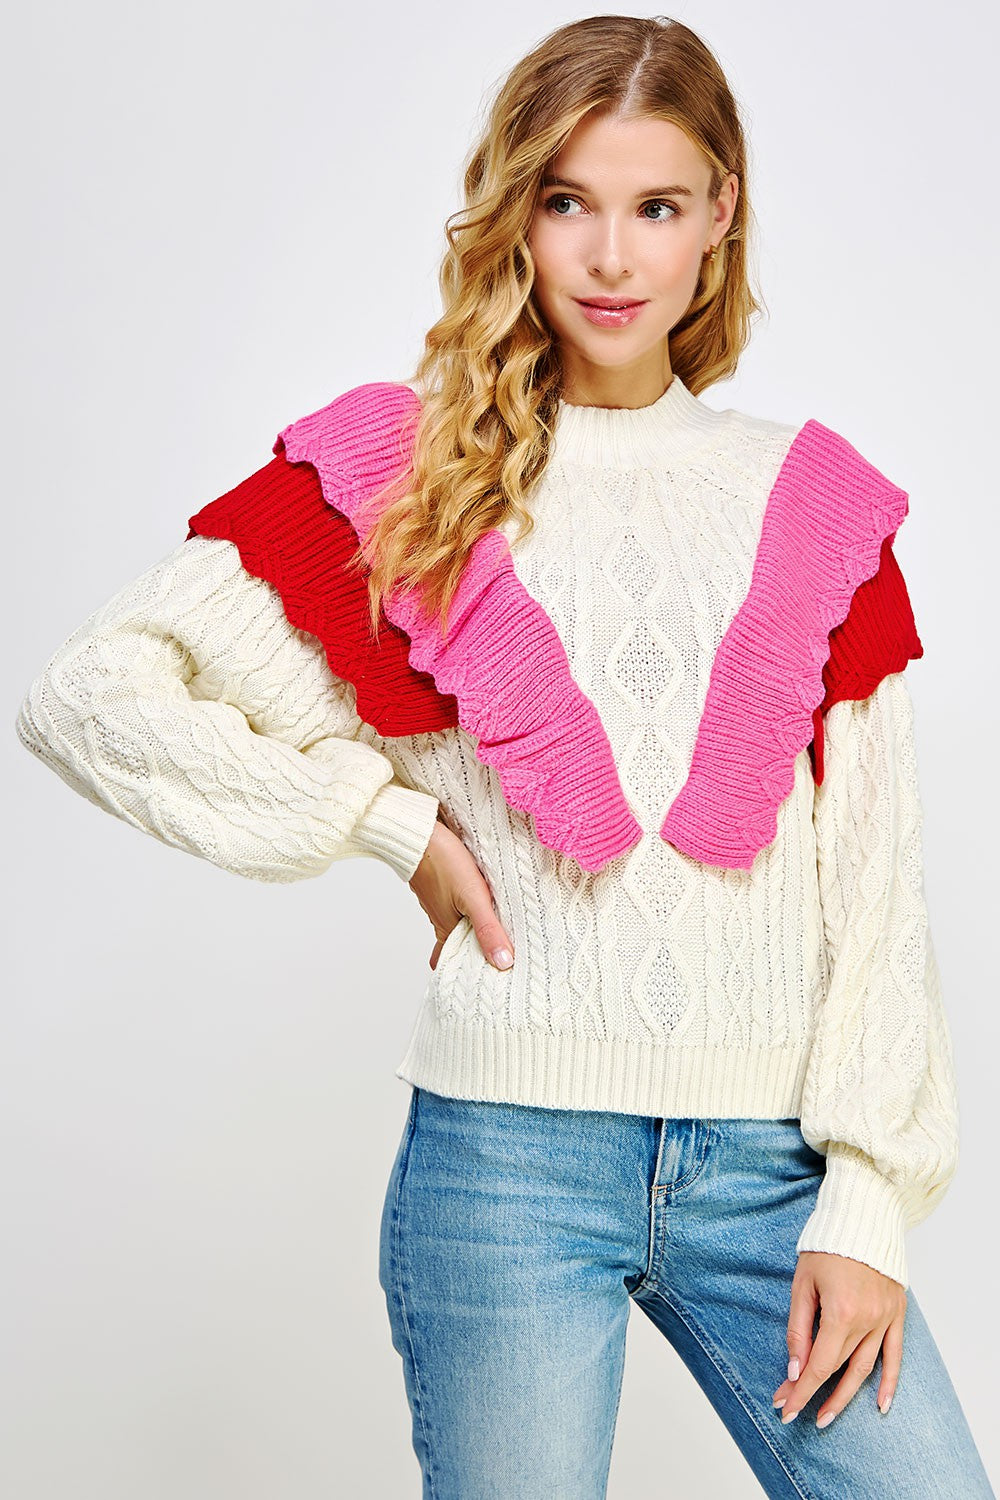 Easy to Love Sweater